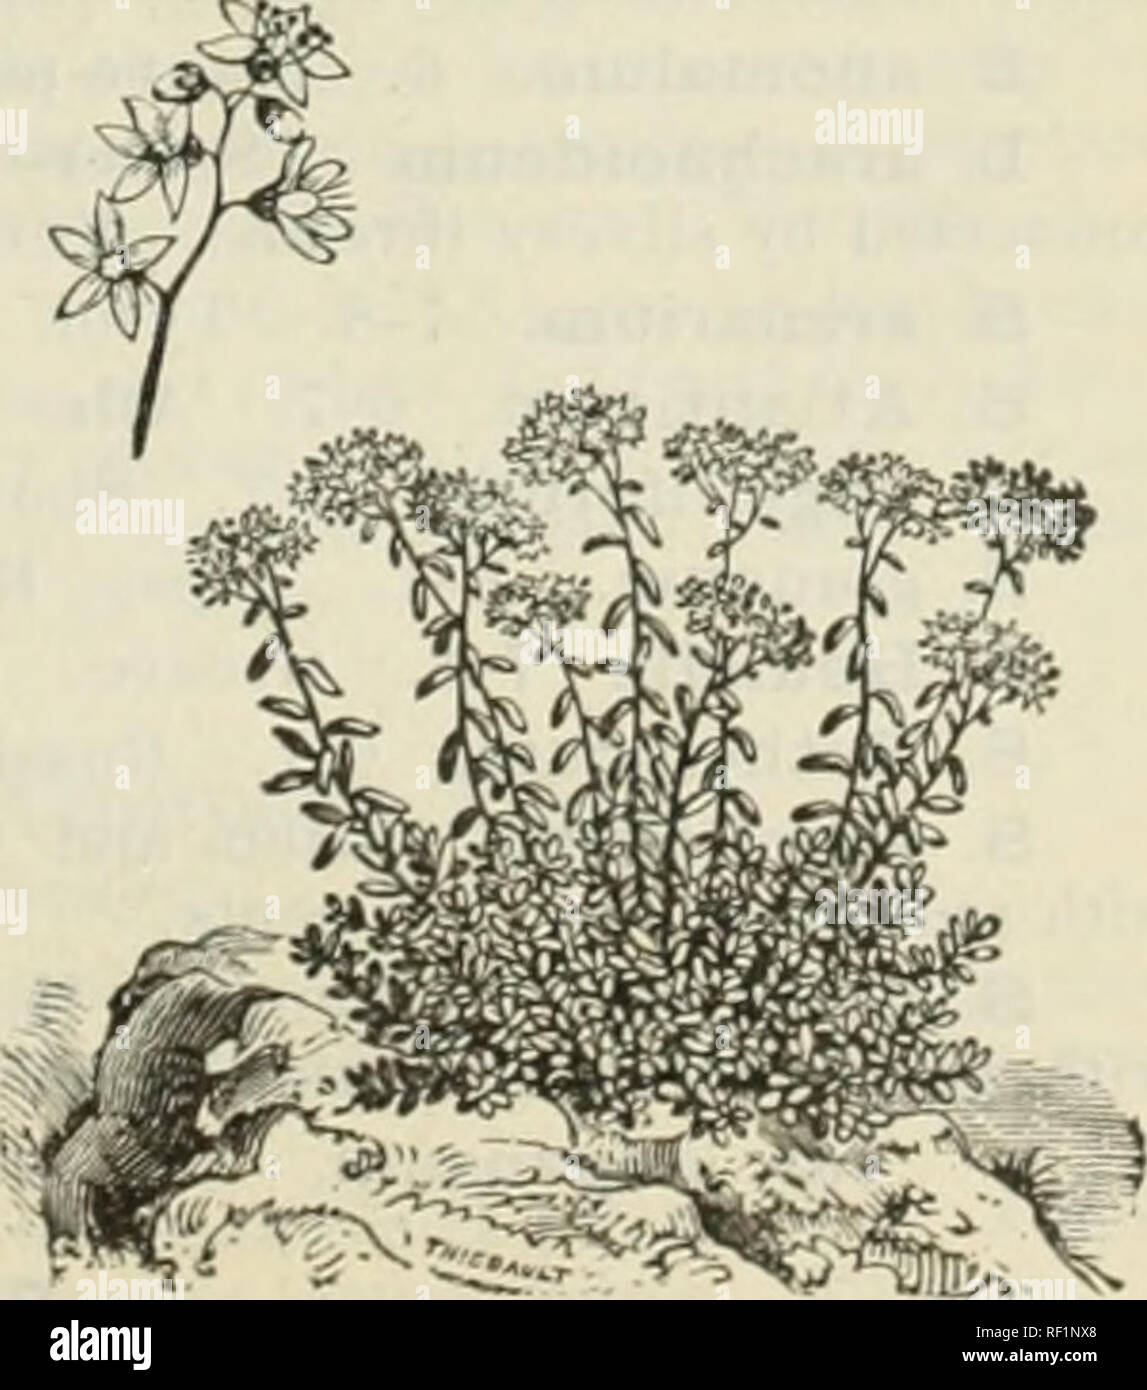 . Catalogue of hardy ornamental trees, shrubs, and vines, hardy flowers and large and small fruits. Nurseries (Horticulture) Massachusetts Catalogs; Plants, Ornamental Catalogs; Trees Seedlings Catalogs; Ornamental shrubs Catalogs; Flowers Catalogs; Fruit Catalogs. SEDUM — Stone-Crop. Scabiosa Caucasica. flower effect any extra care in cultivation that -may be given them. S. acre. [Wall Pepper.] 4 in., 6-7. Eng. Handsome light-green evergreen foliage, clouds of bright-yellow flowers. A choice carpet plant. 15 cents. var. aureum. Bright golden foliage. 20 cents. S. Aizoon. 0 in., 7-x. Siberia.  Stock Photo